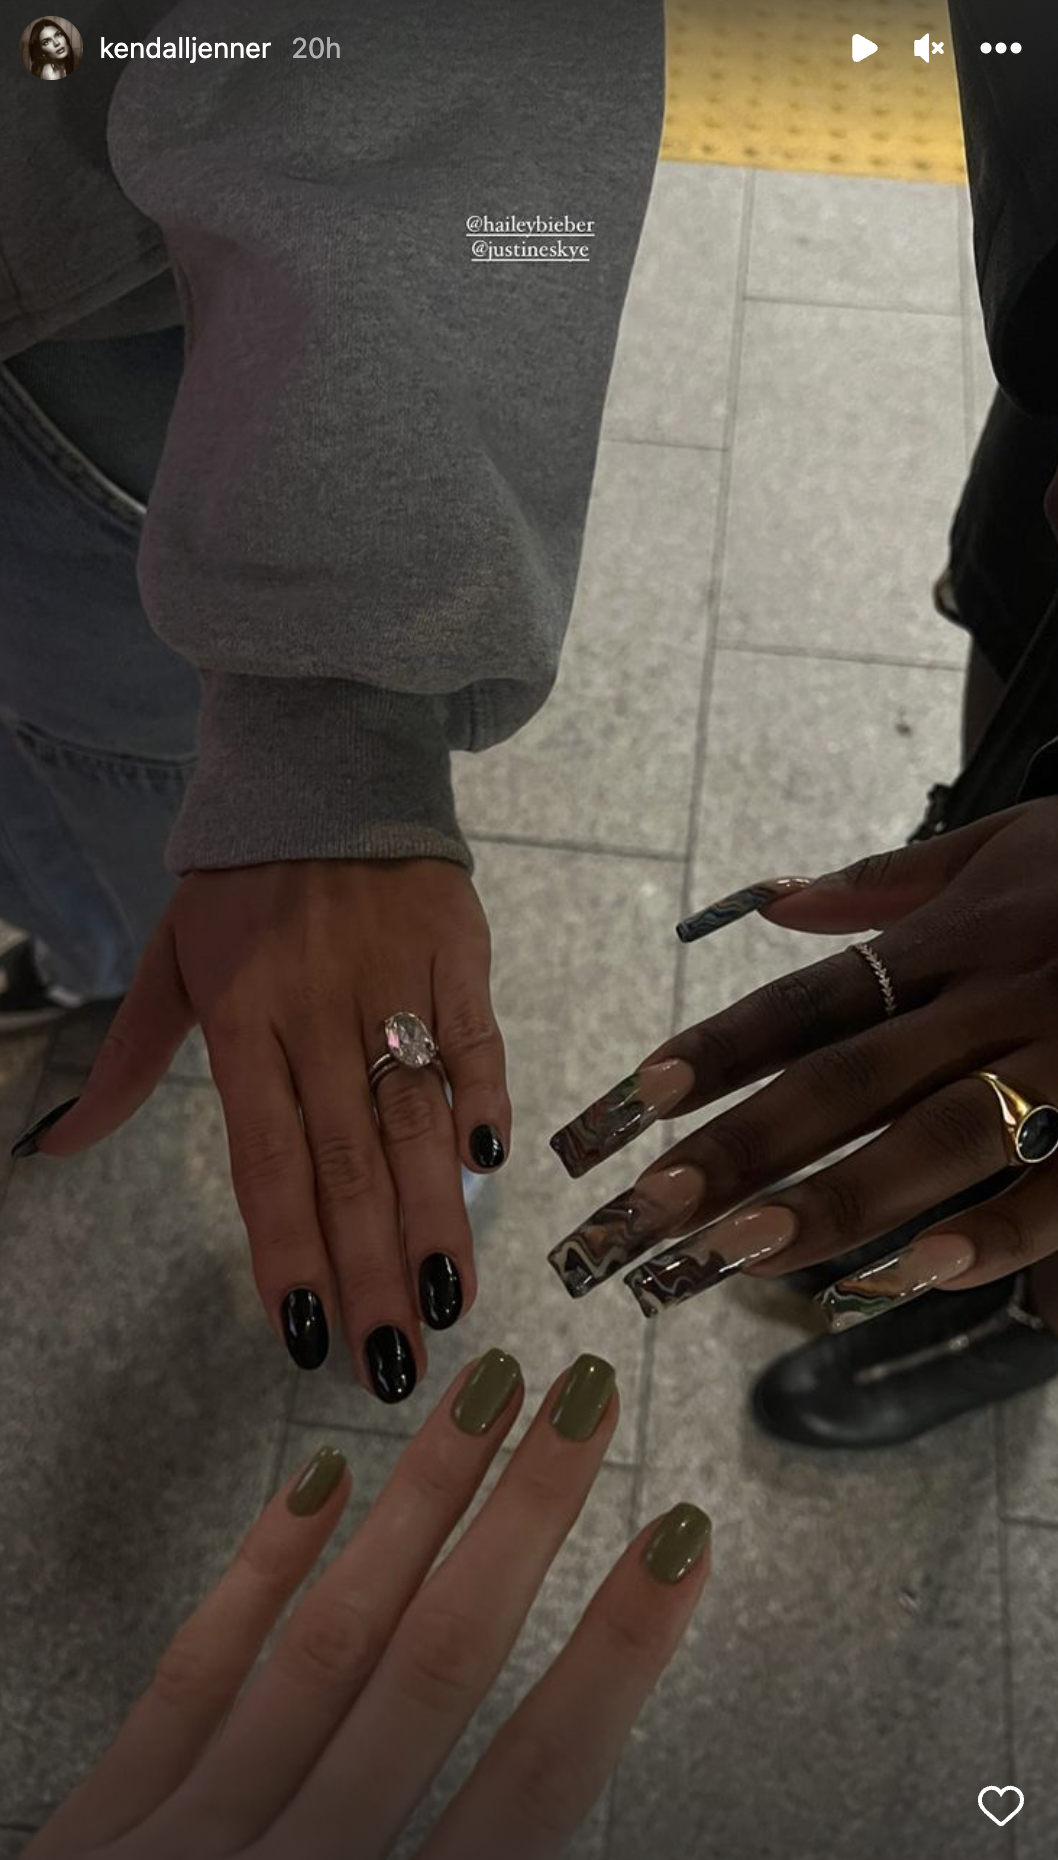 Timeless nail art: How the French manicure made its comeback, with a twist  - CNA Lifestyle